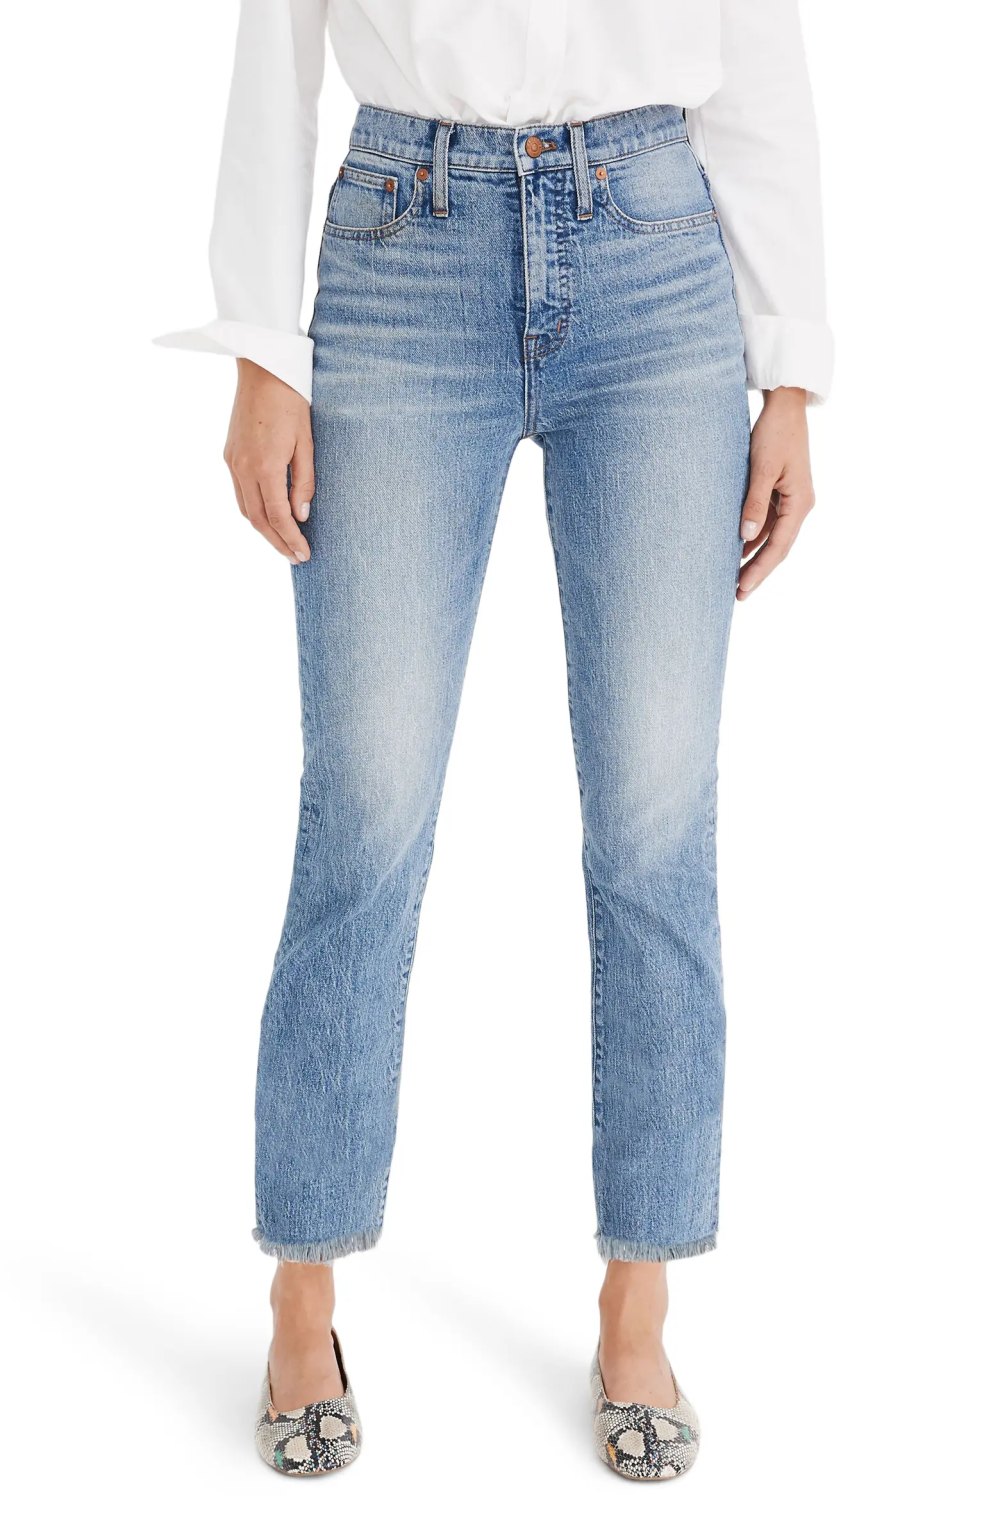 15 Flattering Skinny Jeans to Wear With Flats